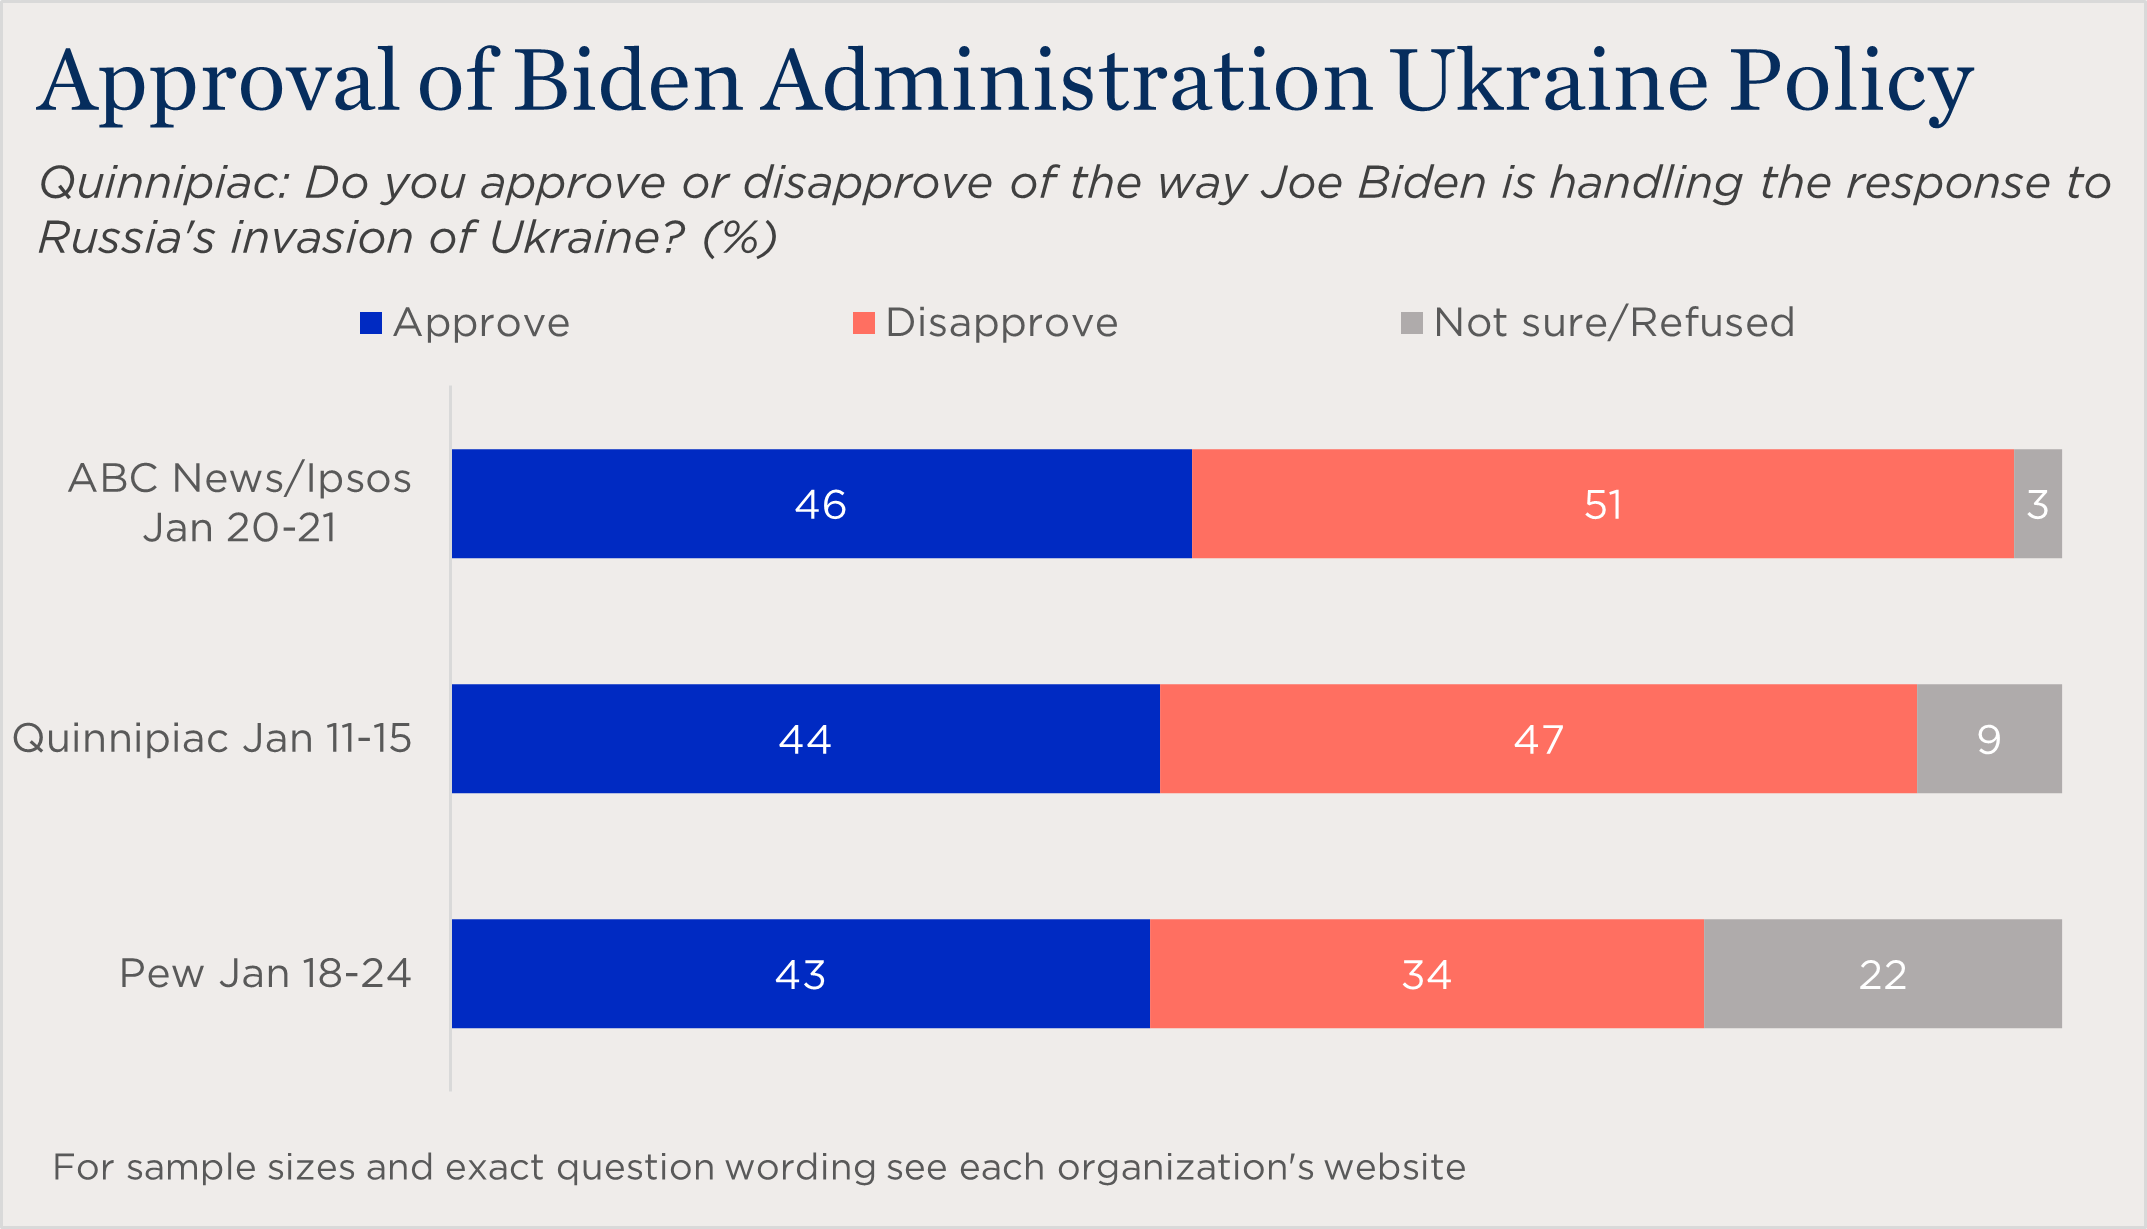 "bar chart showing approval of Biden Administration's Ukraine policy"